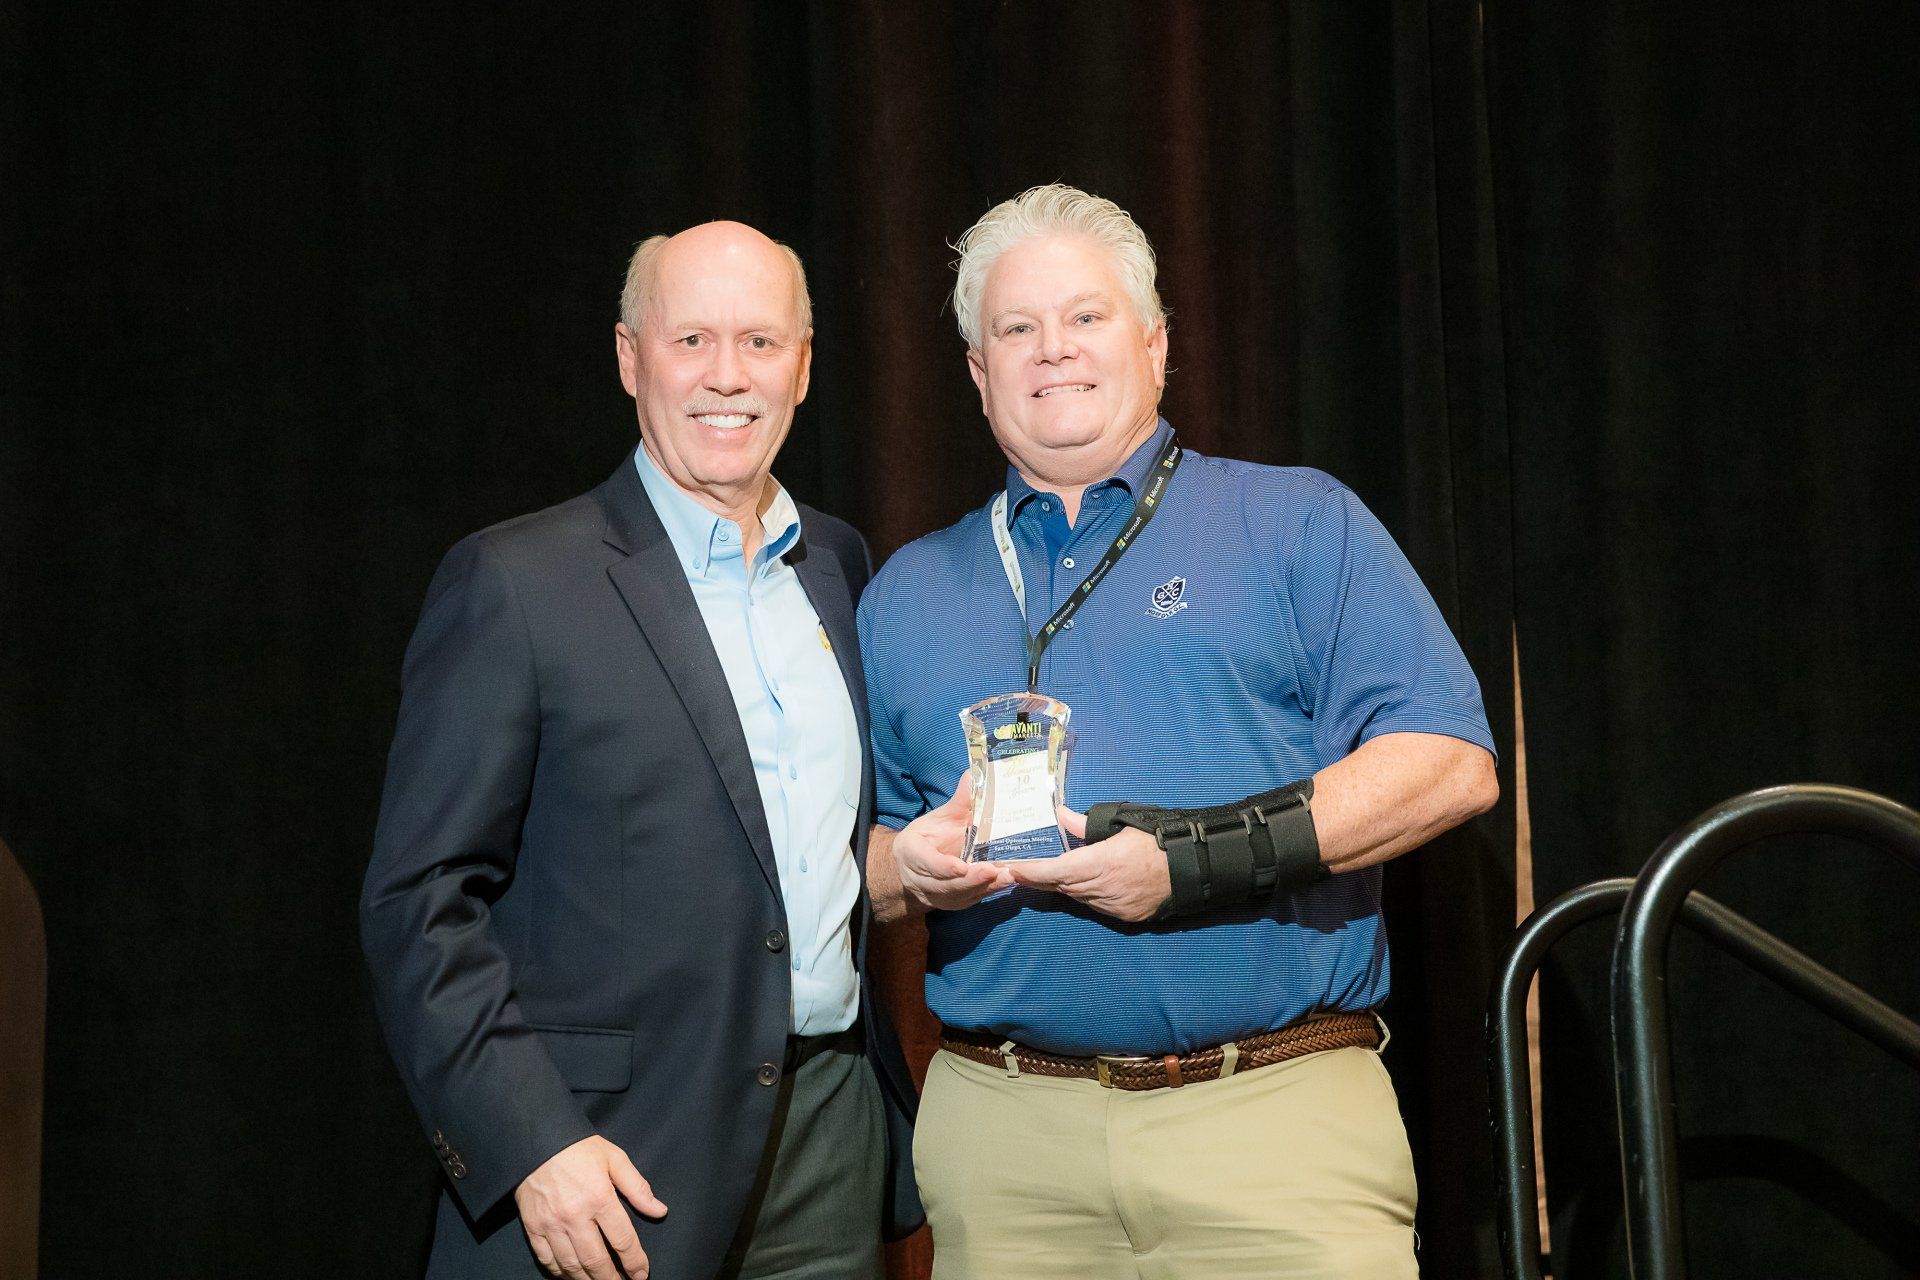 Steve Foley accepts award for Operator of the Year from Jim Brinton, CEO of Avanti Markets